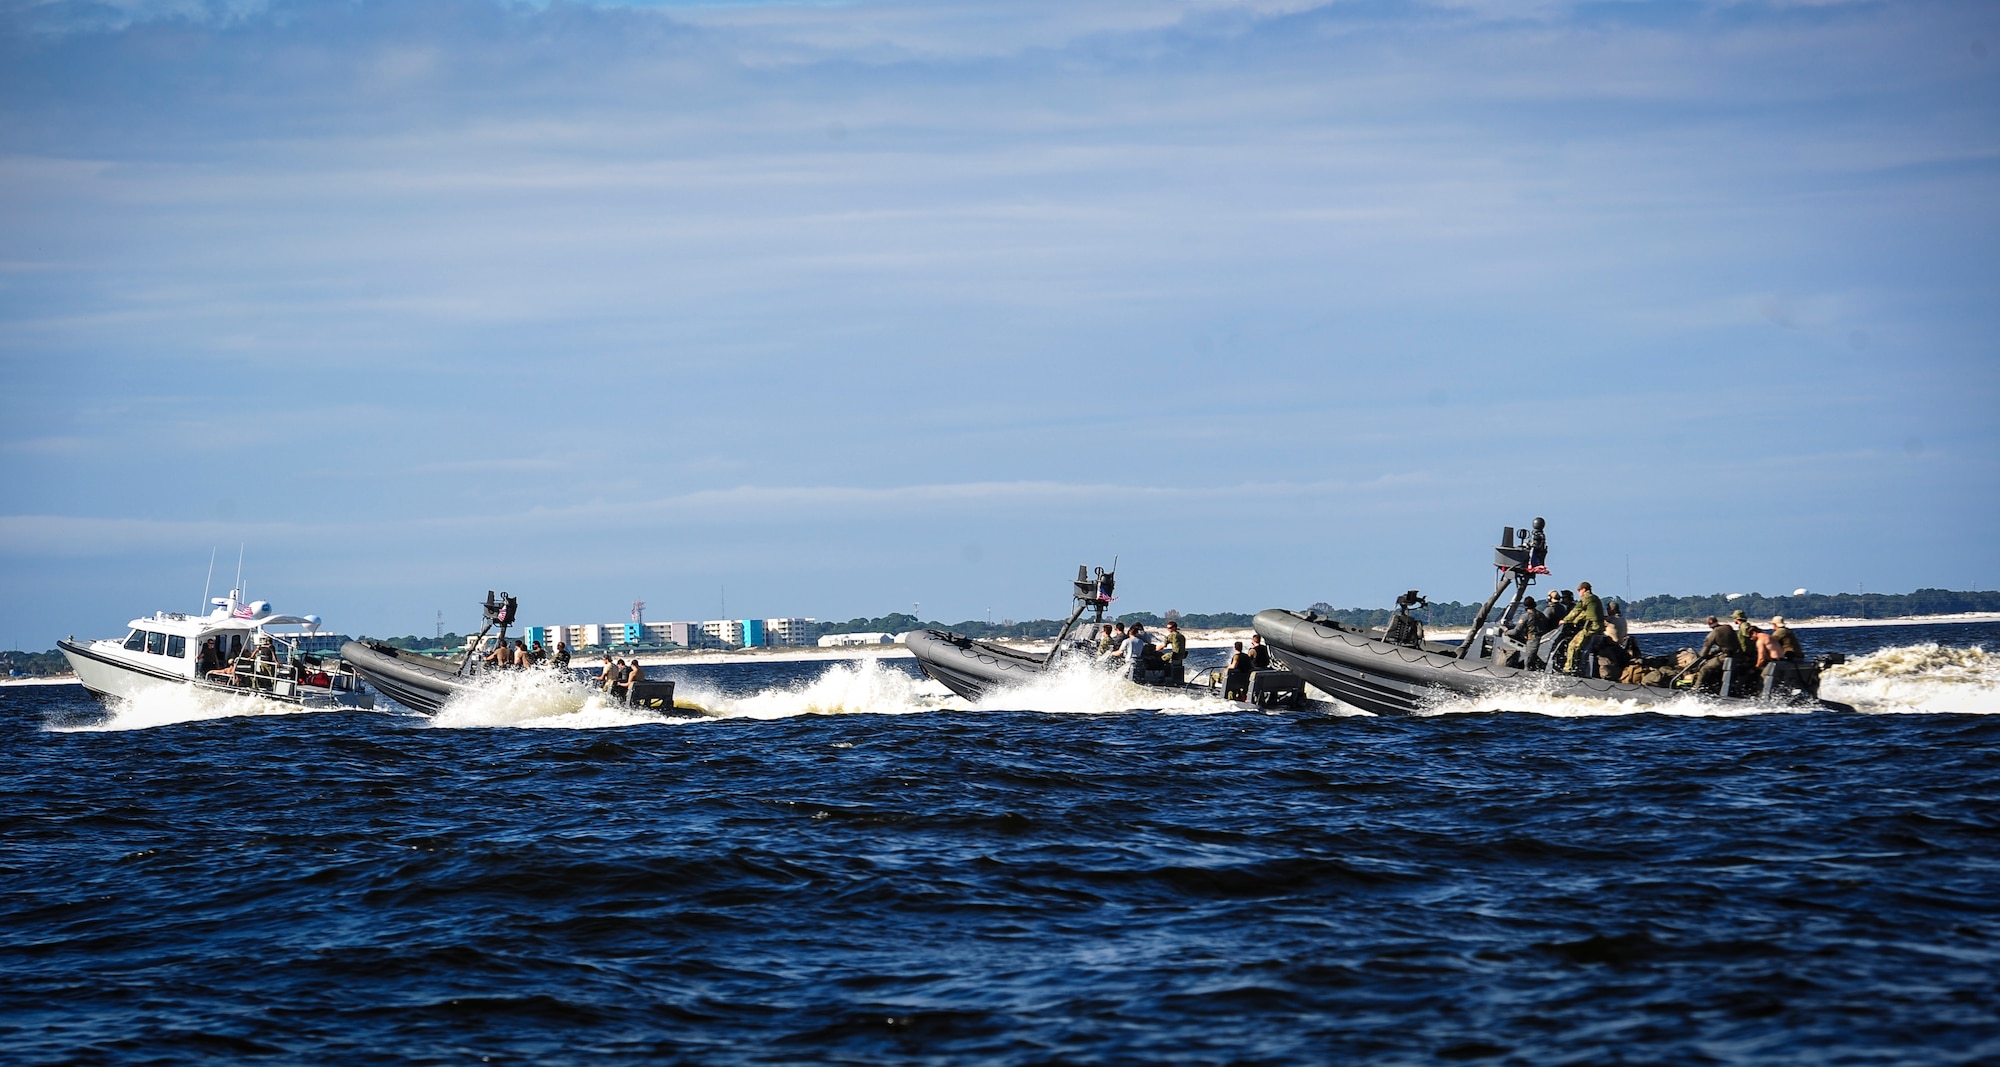 Special operation forces and maritime operation members travel to the Gulf of Mexico to retrieve a rigid inflatable boat for Maritime Craft Aerial Delivery Systems (MCADS) training, Nov. 12, 2015. MCADS enable special operation forces members to rapidly deploy anywhere around the world in a maritime environment. (U.S. Air Force photo by Senior Airman Meagan Schutter)